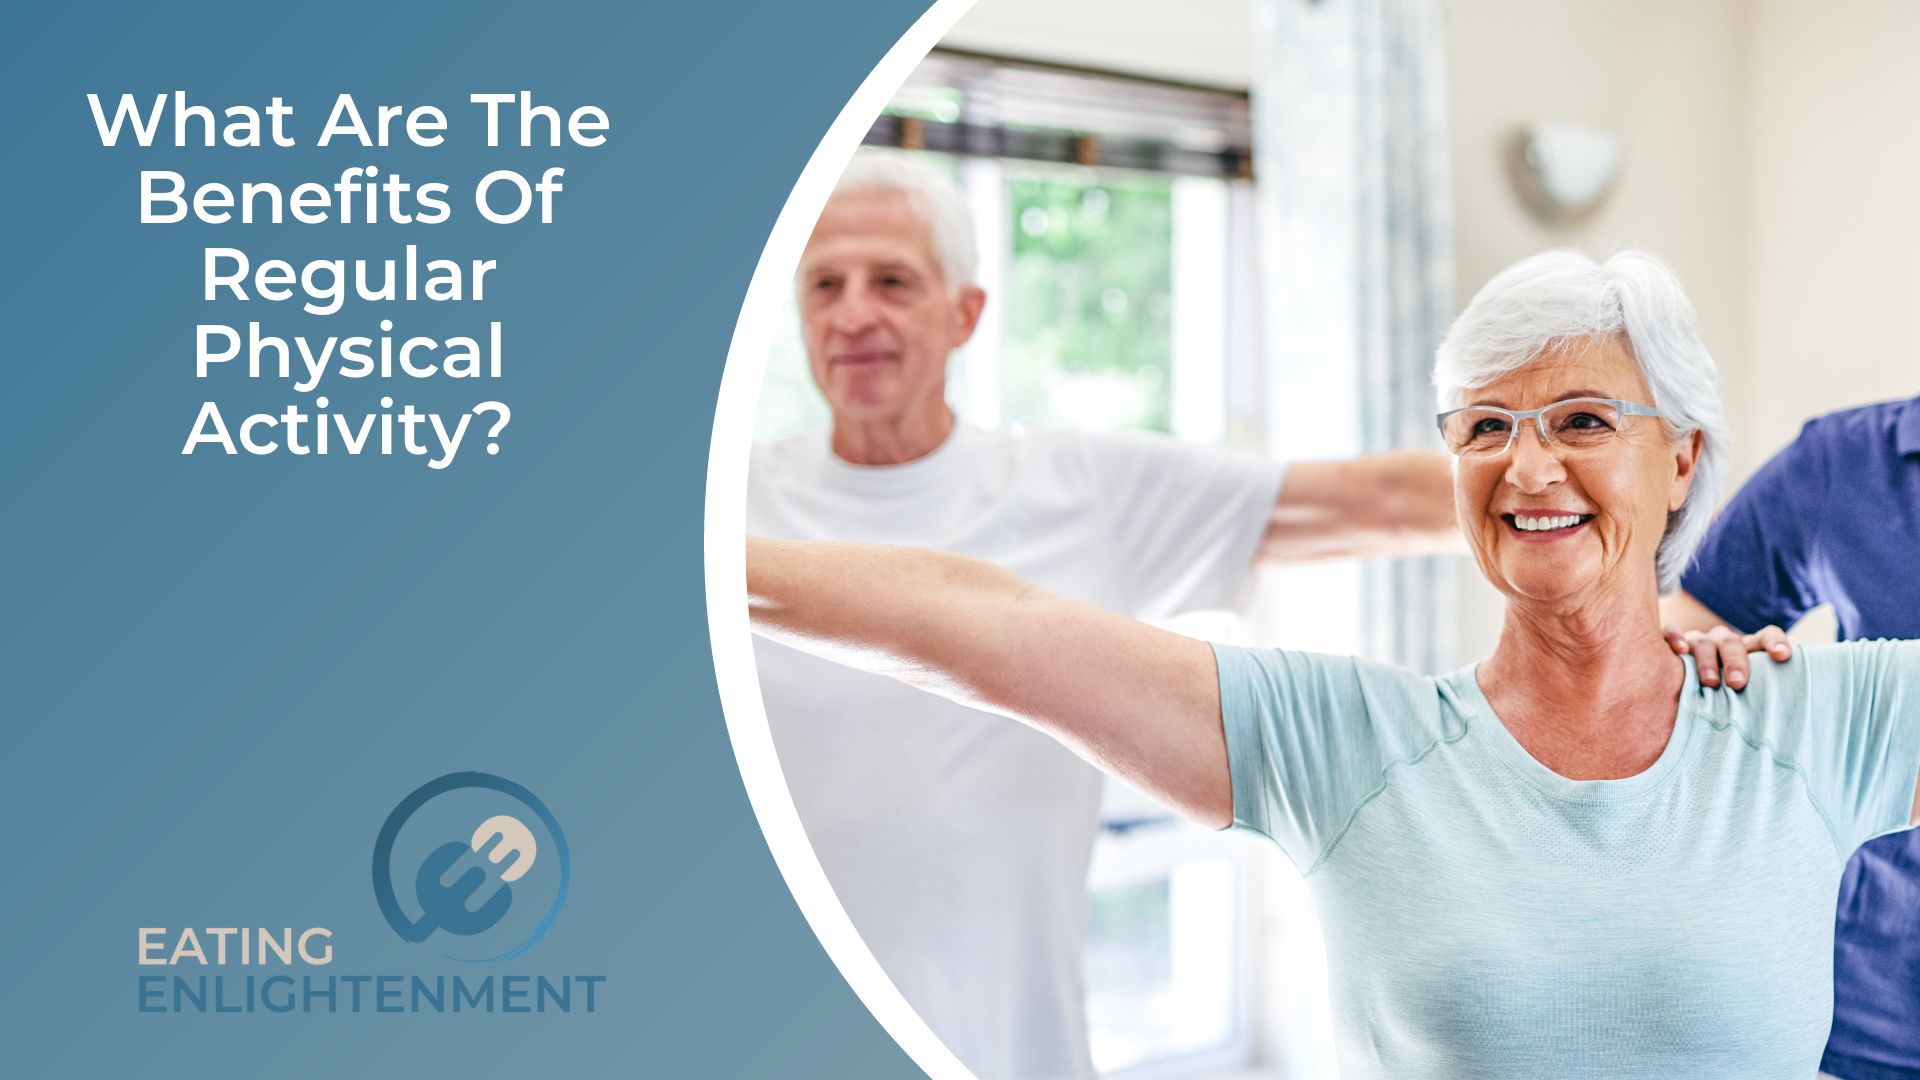 What Are The Benefits Of Regular Physical Activity